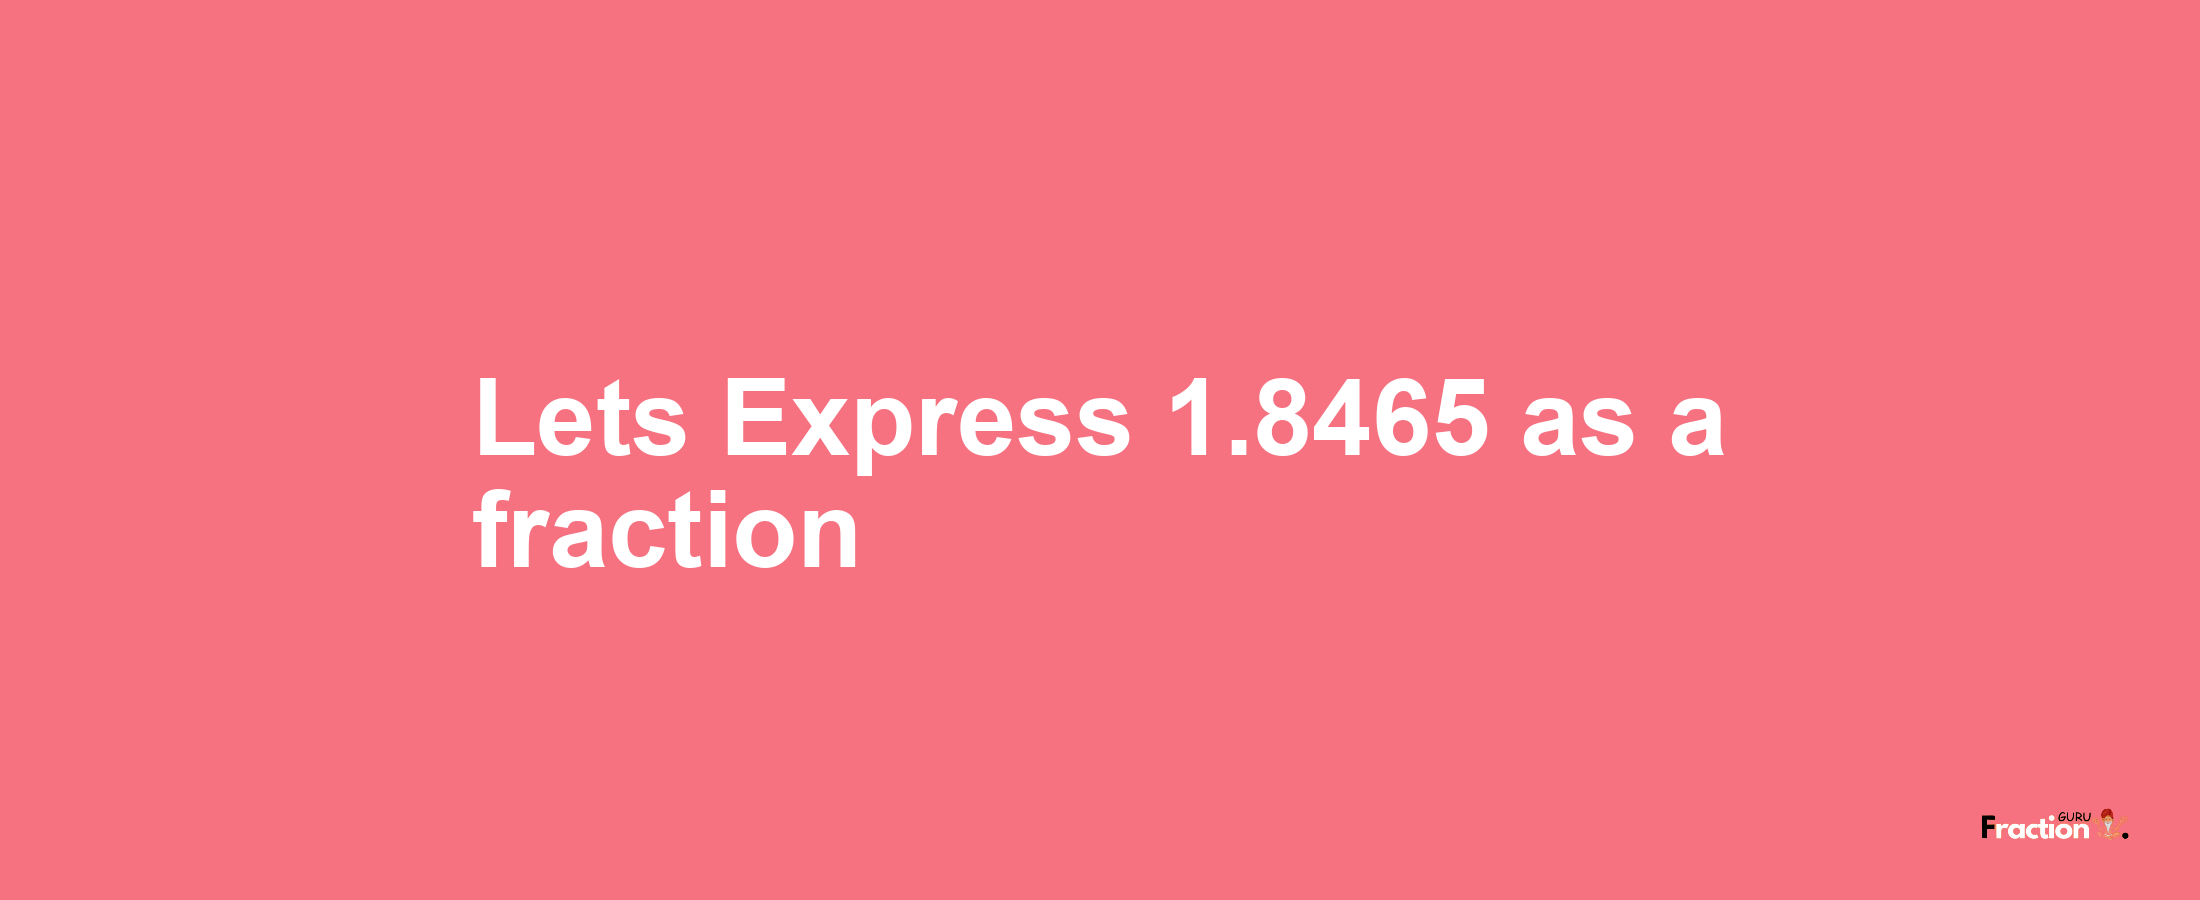 Lets Express 1.8465 as afraction